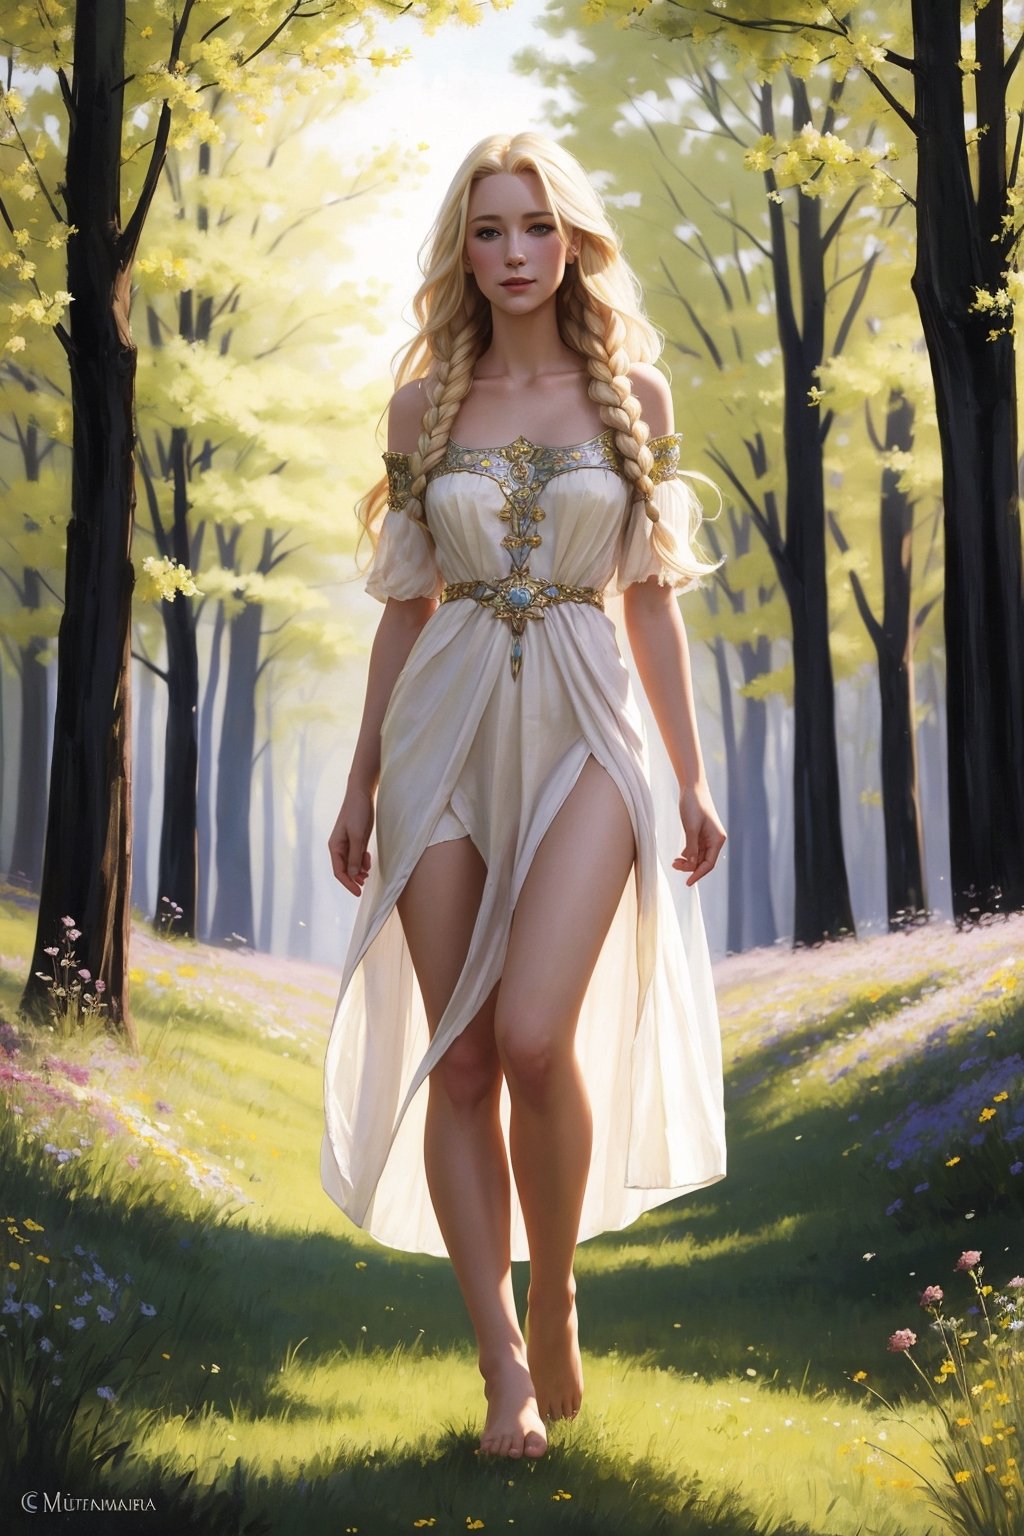 Portrait of a 25-year-old girl with long blonde hair, dressed in a dress made of light material, barefoot, standing in a meadow among flowers,  contrapposto,
 brom's art, depiction of an epic fantasy character, portrait of a character, fantasy art, works by Richard Schmid, A.Mukha, Volegov, impressionism